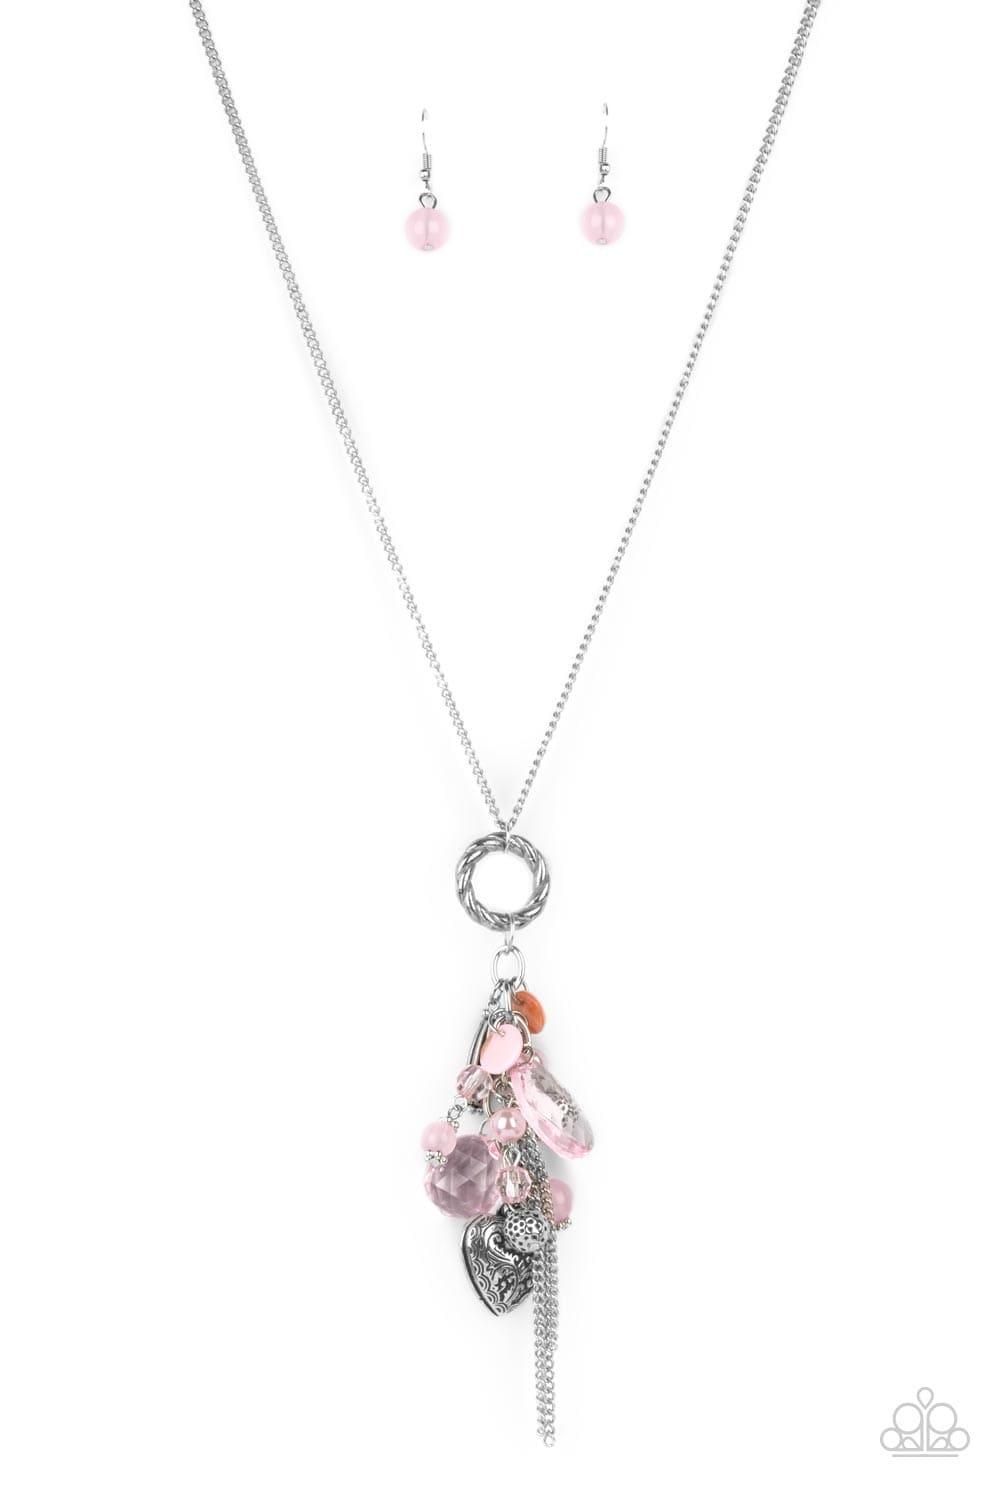 Paparazzi Accessories - Amor To Love - Pink Necklace - Bling by JessieK